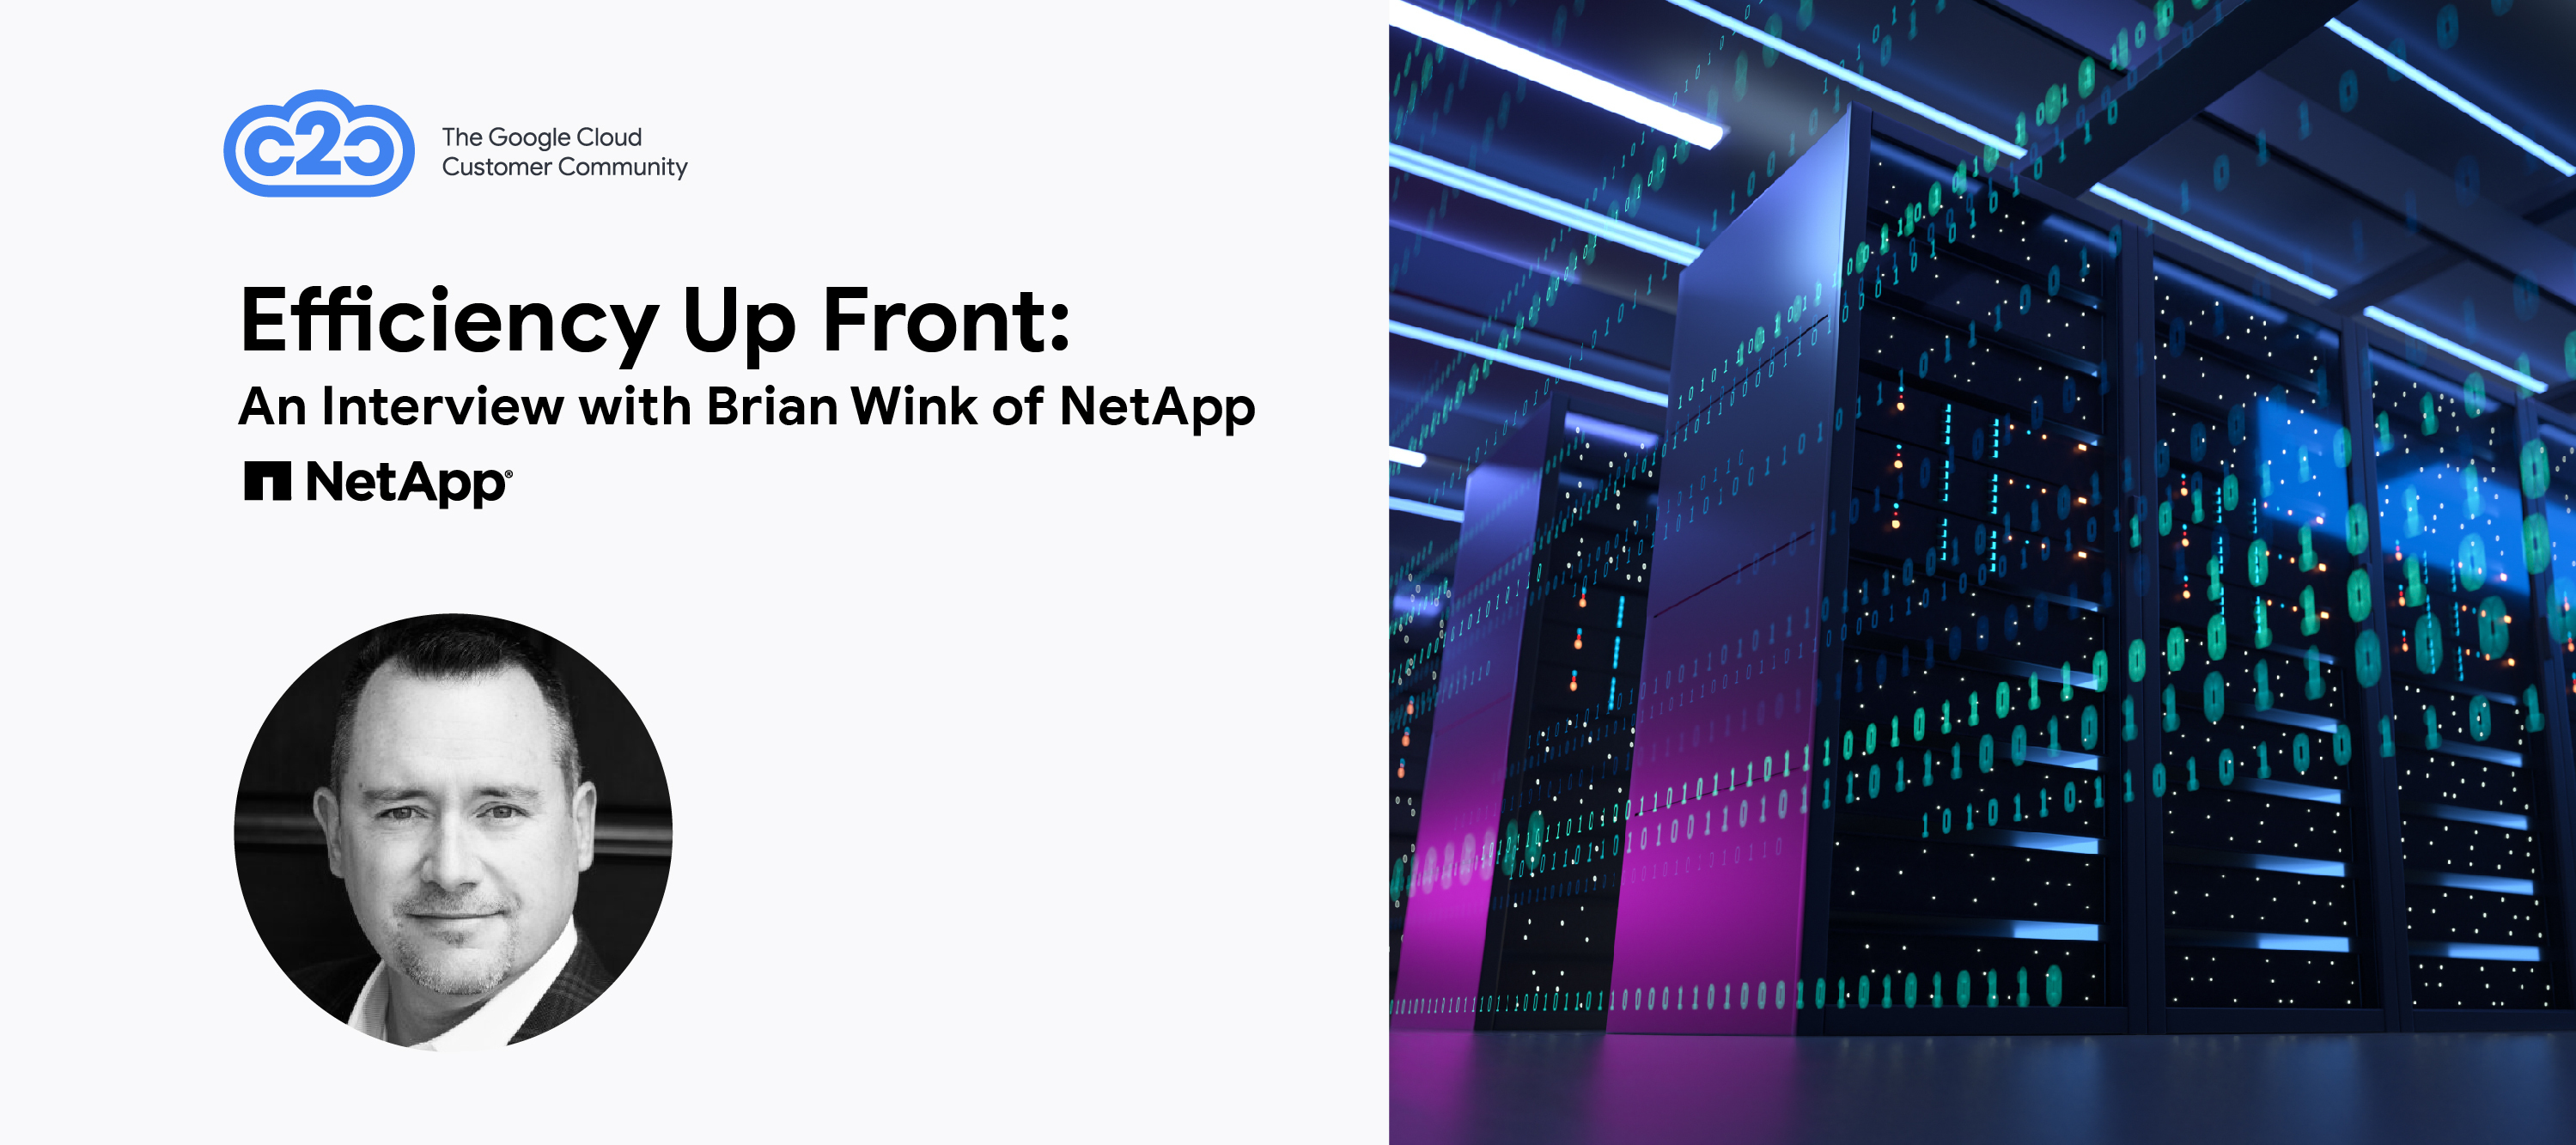 Efficiency Up Front: An Interview with Brian Wink of NetApp